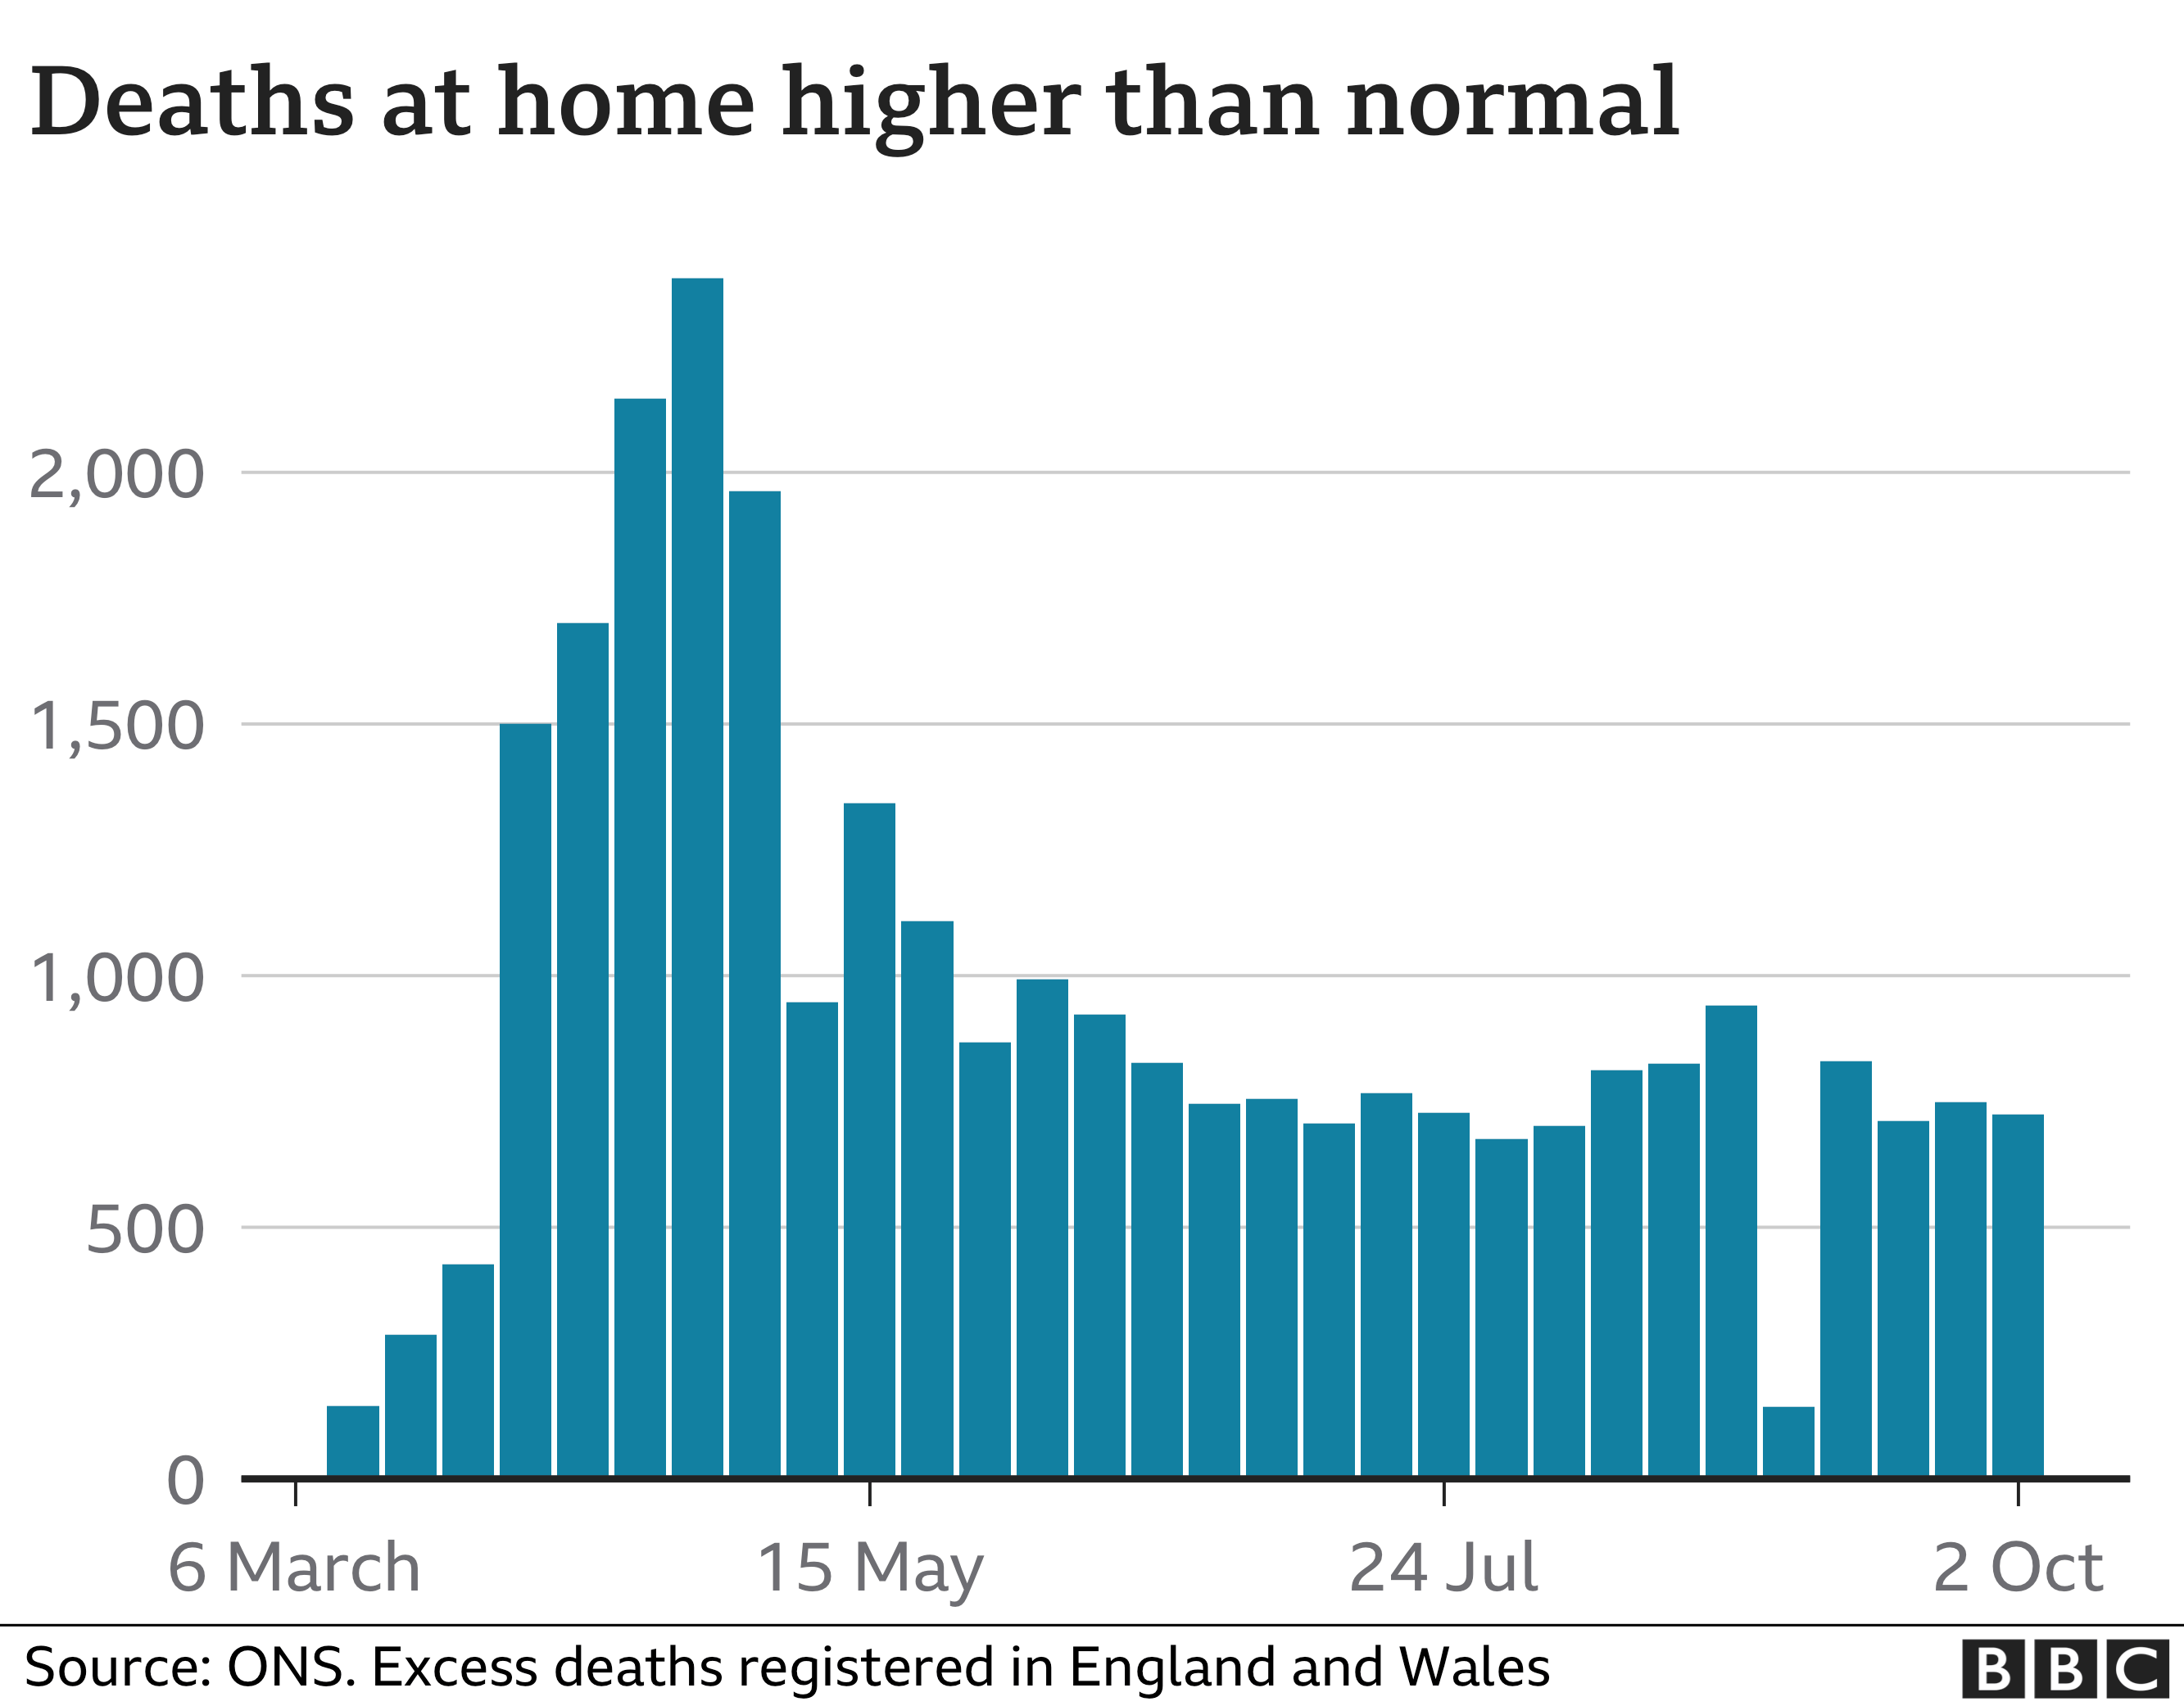 Chart showing deaths at home